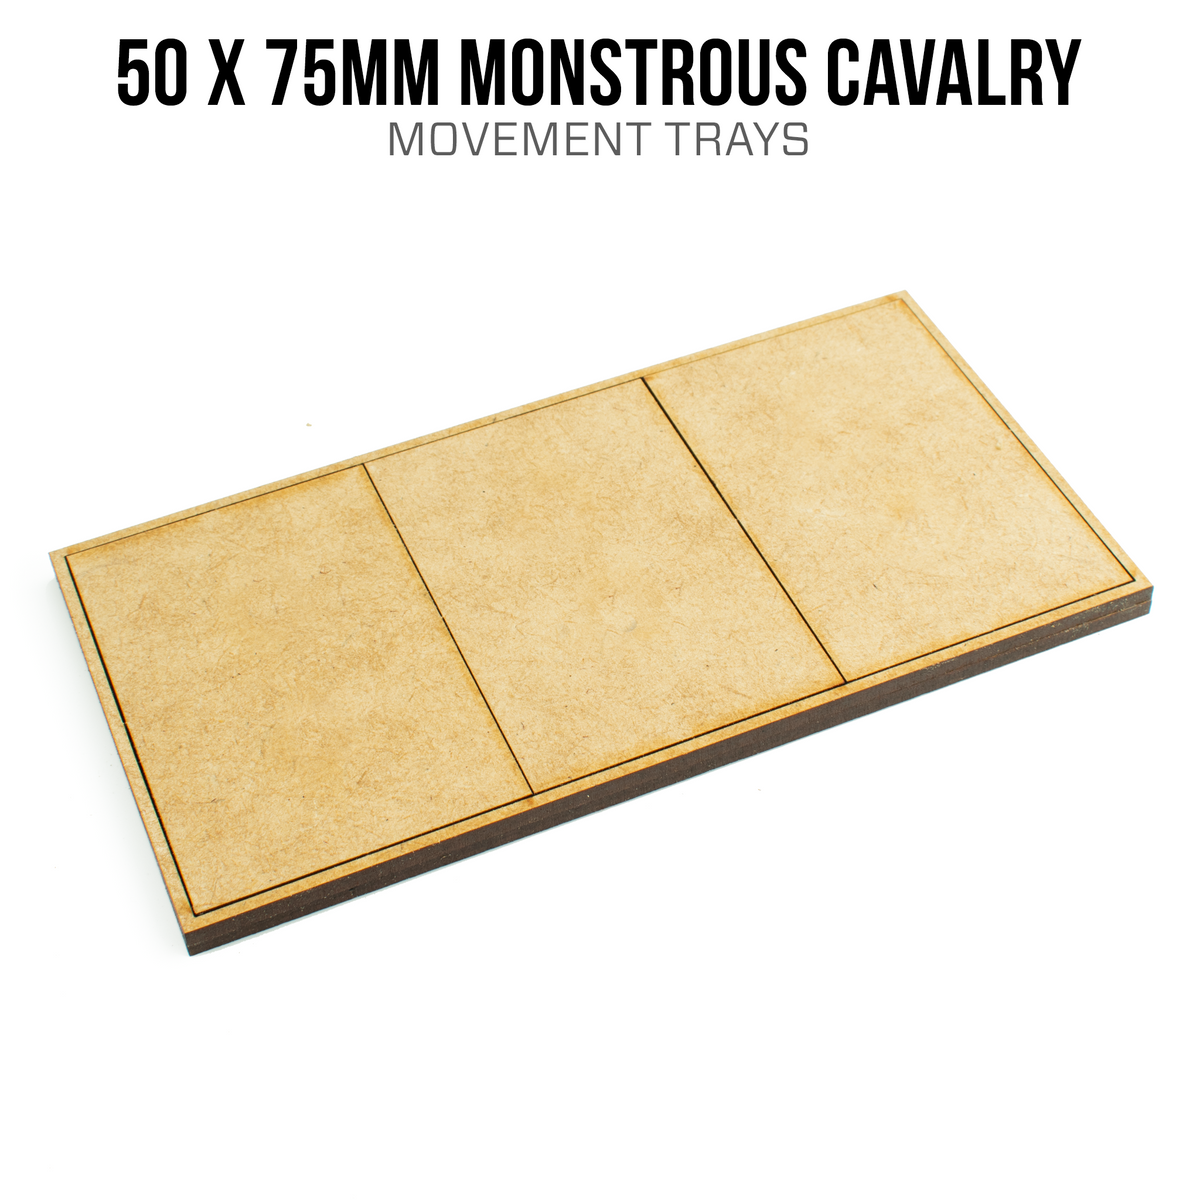 50mm x 75mm Monstrous Cavalry Trays